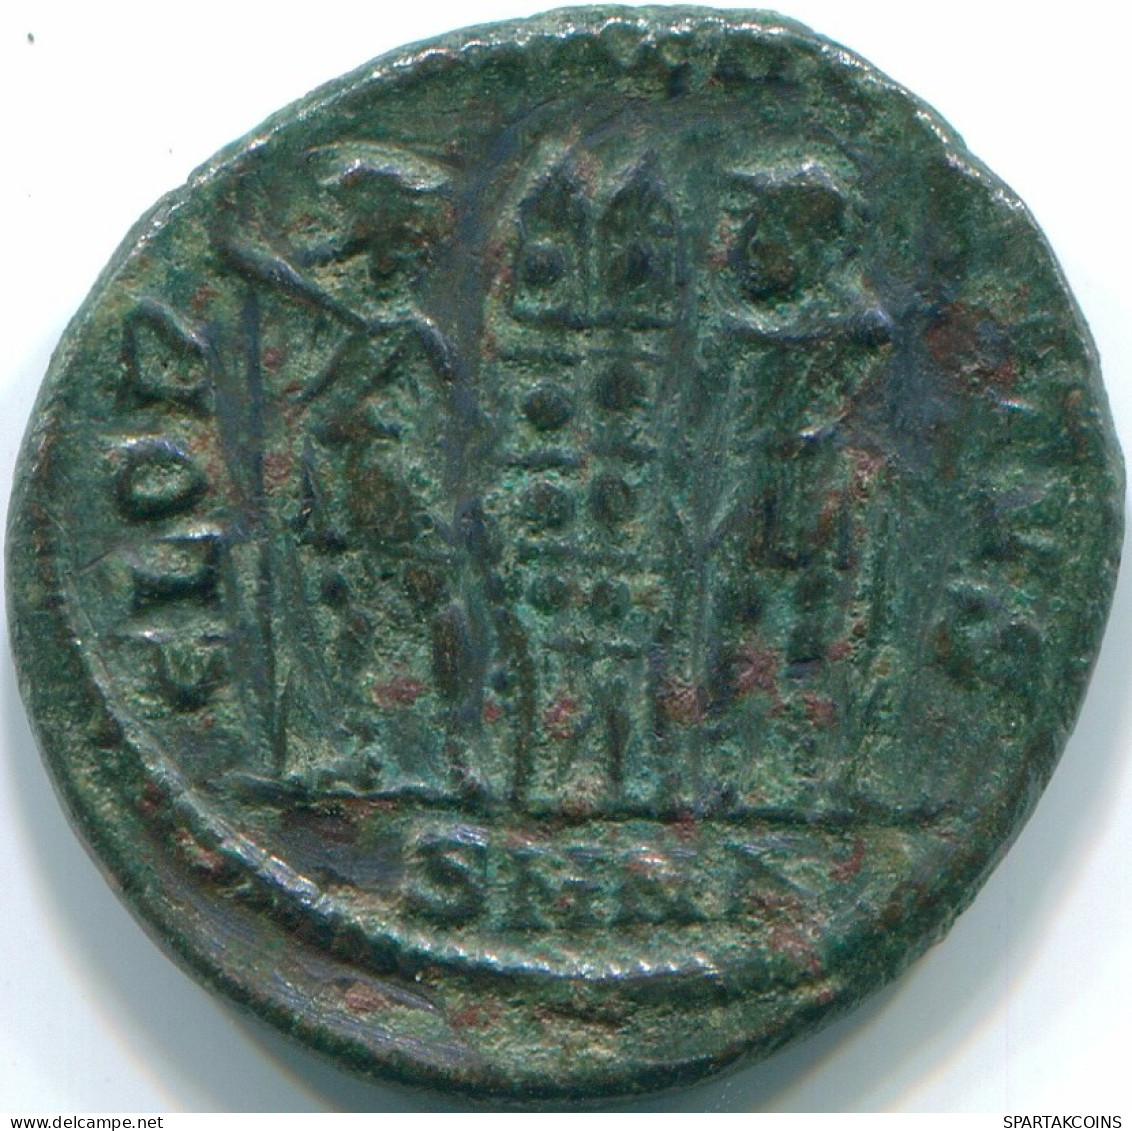 CONSTANTINE II Heraclea Mint AD 330-333 Two Soldiers 2.45g/17.7mm #ROM1033.8.D.A - El Impero Christiano (307 / 363)